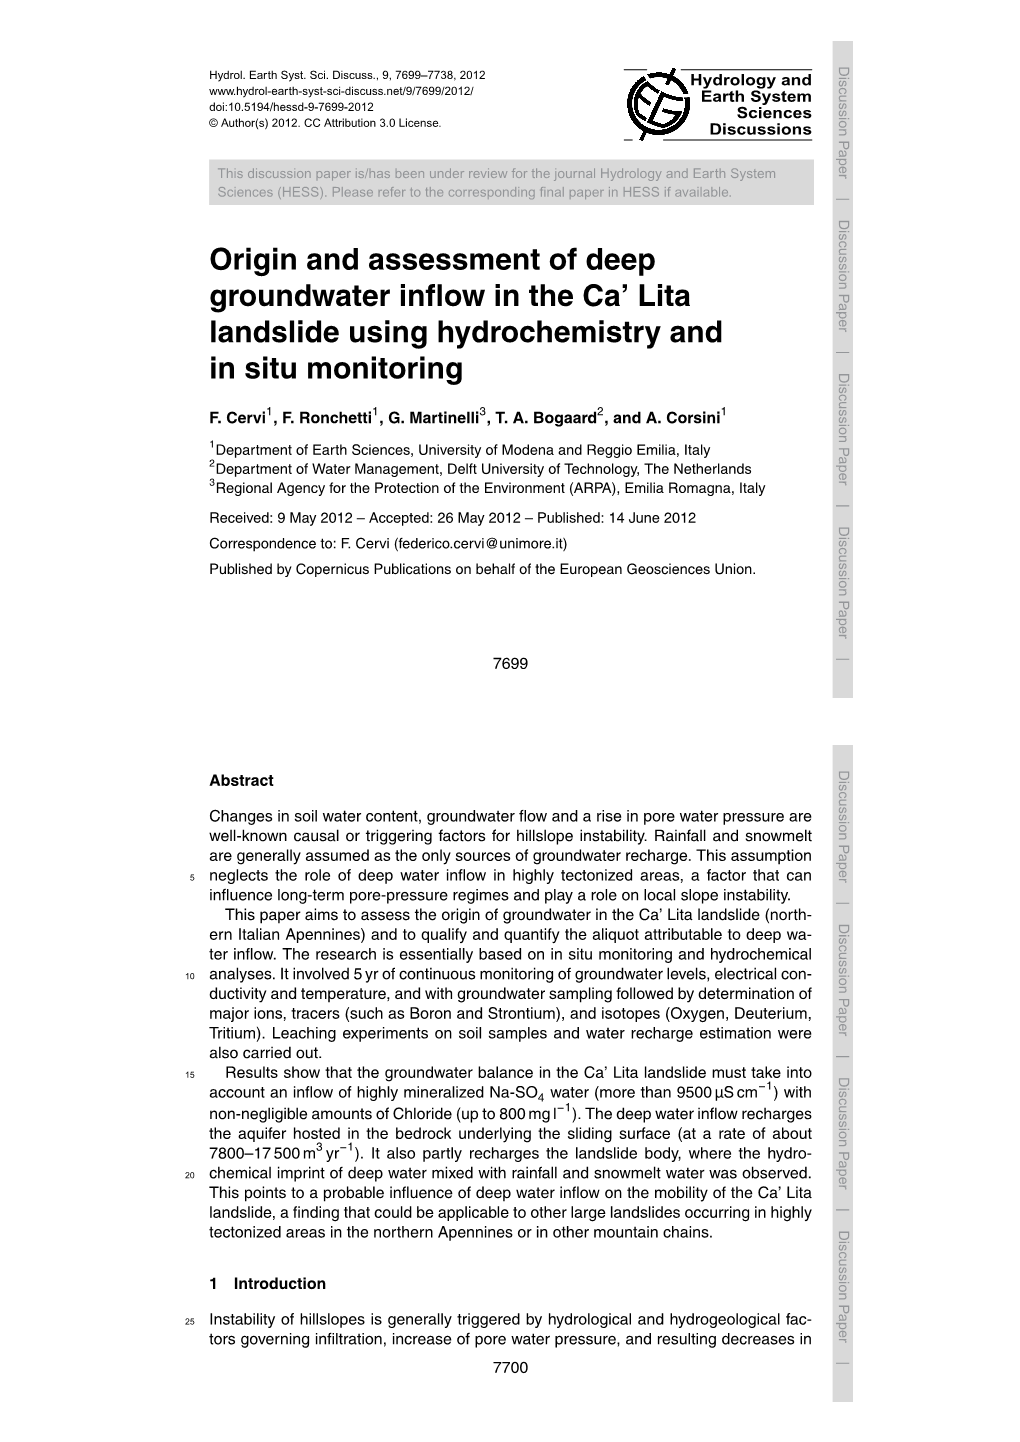 Origin and Assessment of Deep Groundwater Inflow in the Ca' Lita